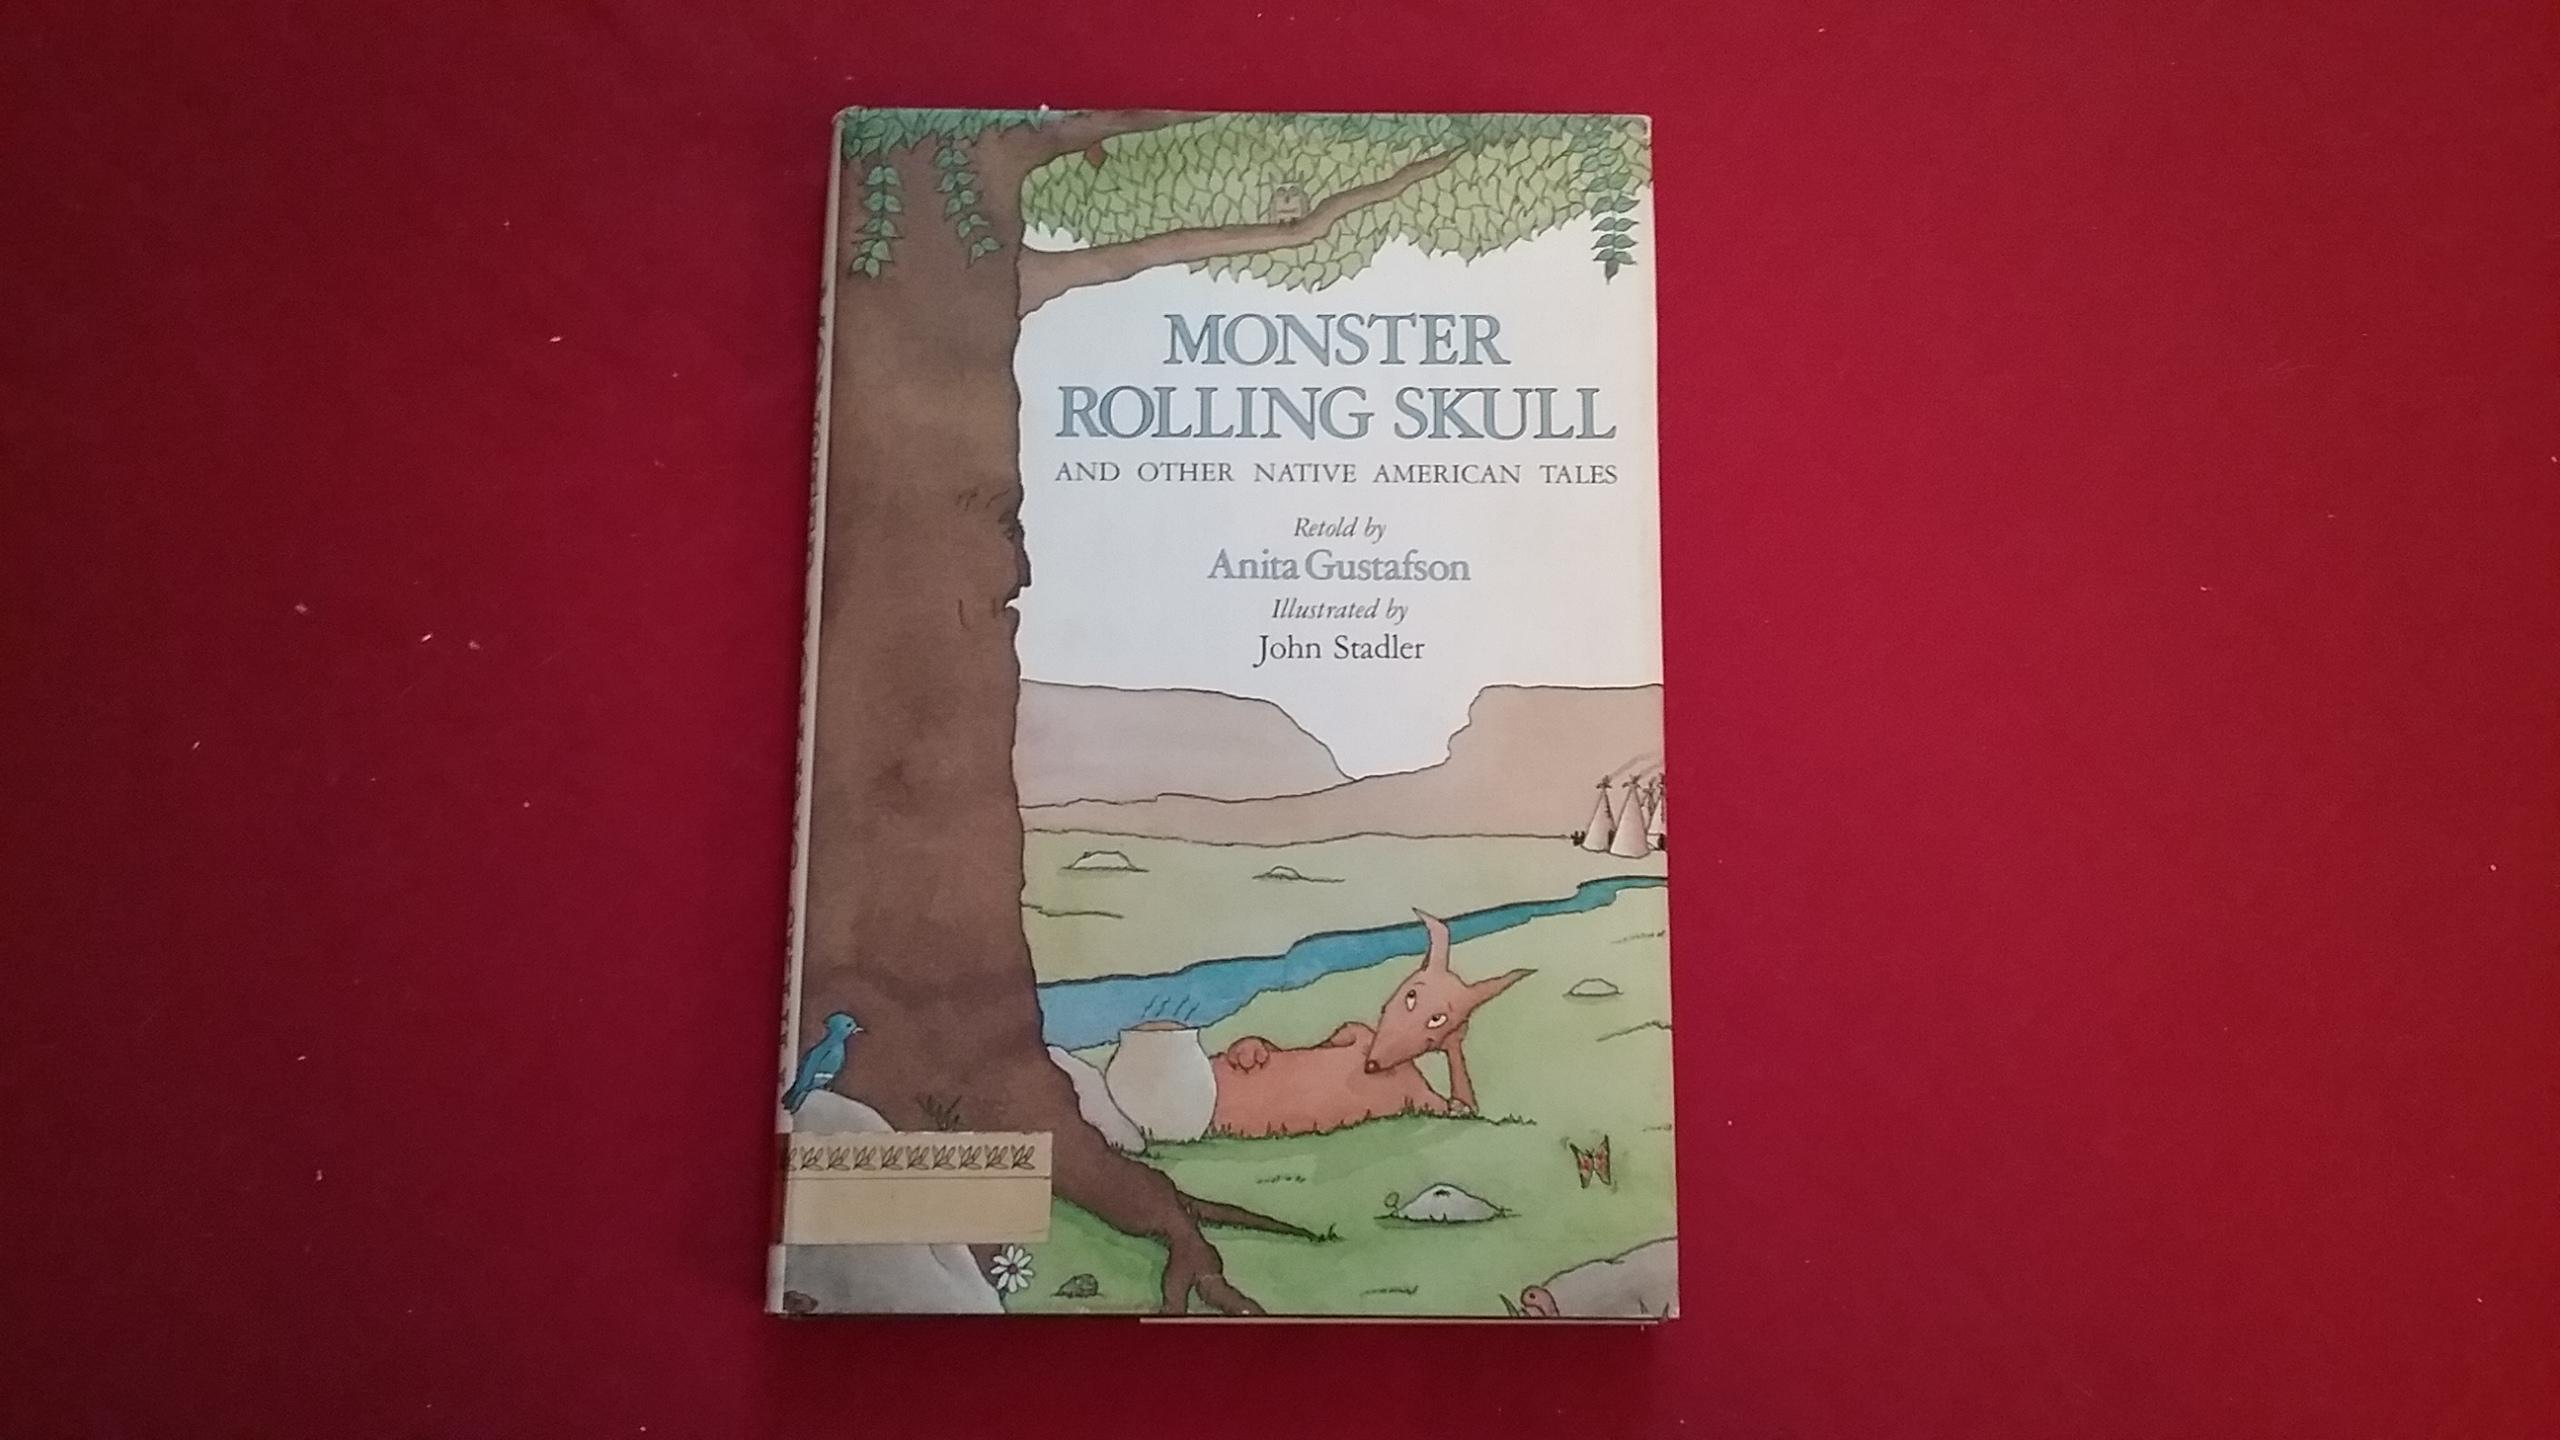 MONSTER ROLLING SKULL AND OTHER NATIVE AMERICAN TALES - Gustafson, Anita